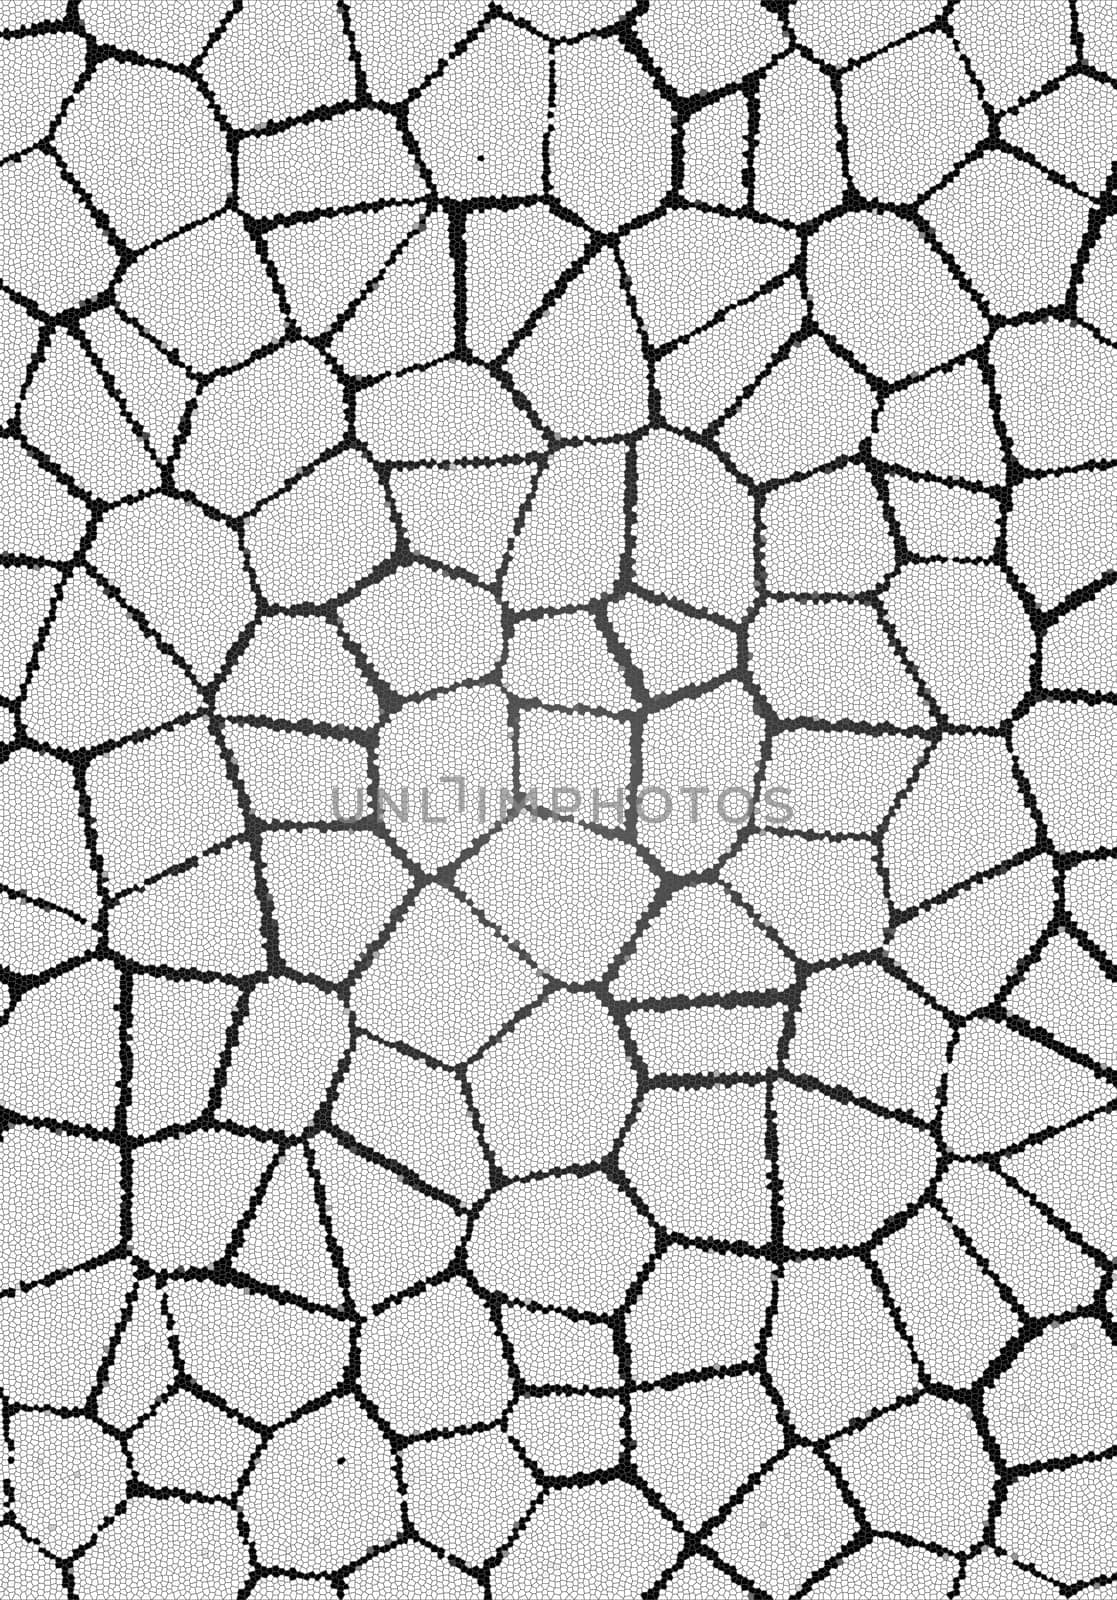 Background with uneven oval fragments of white color and a black outline by Mastak80